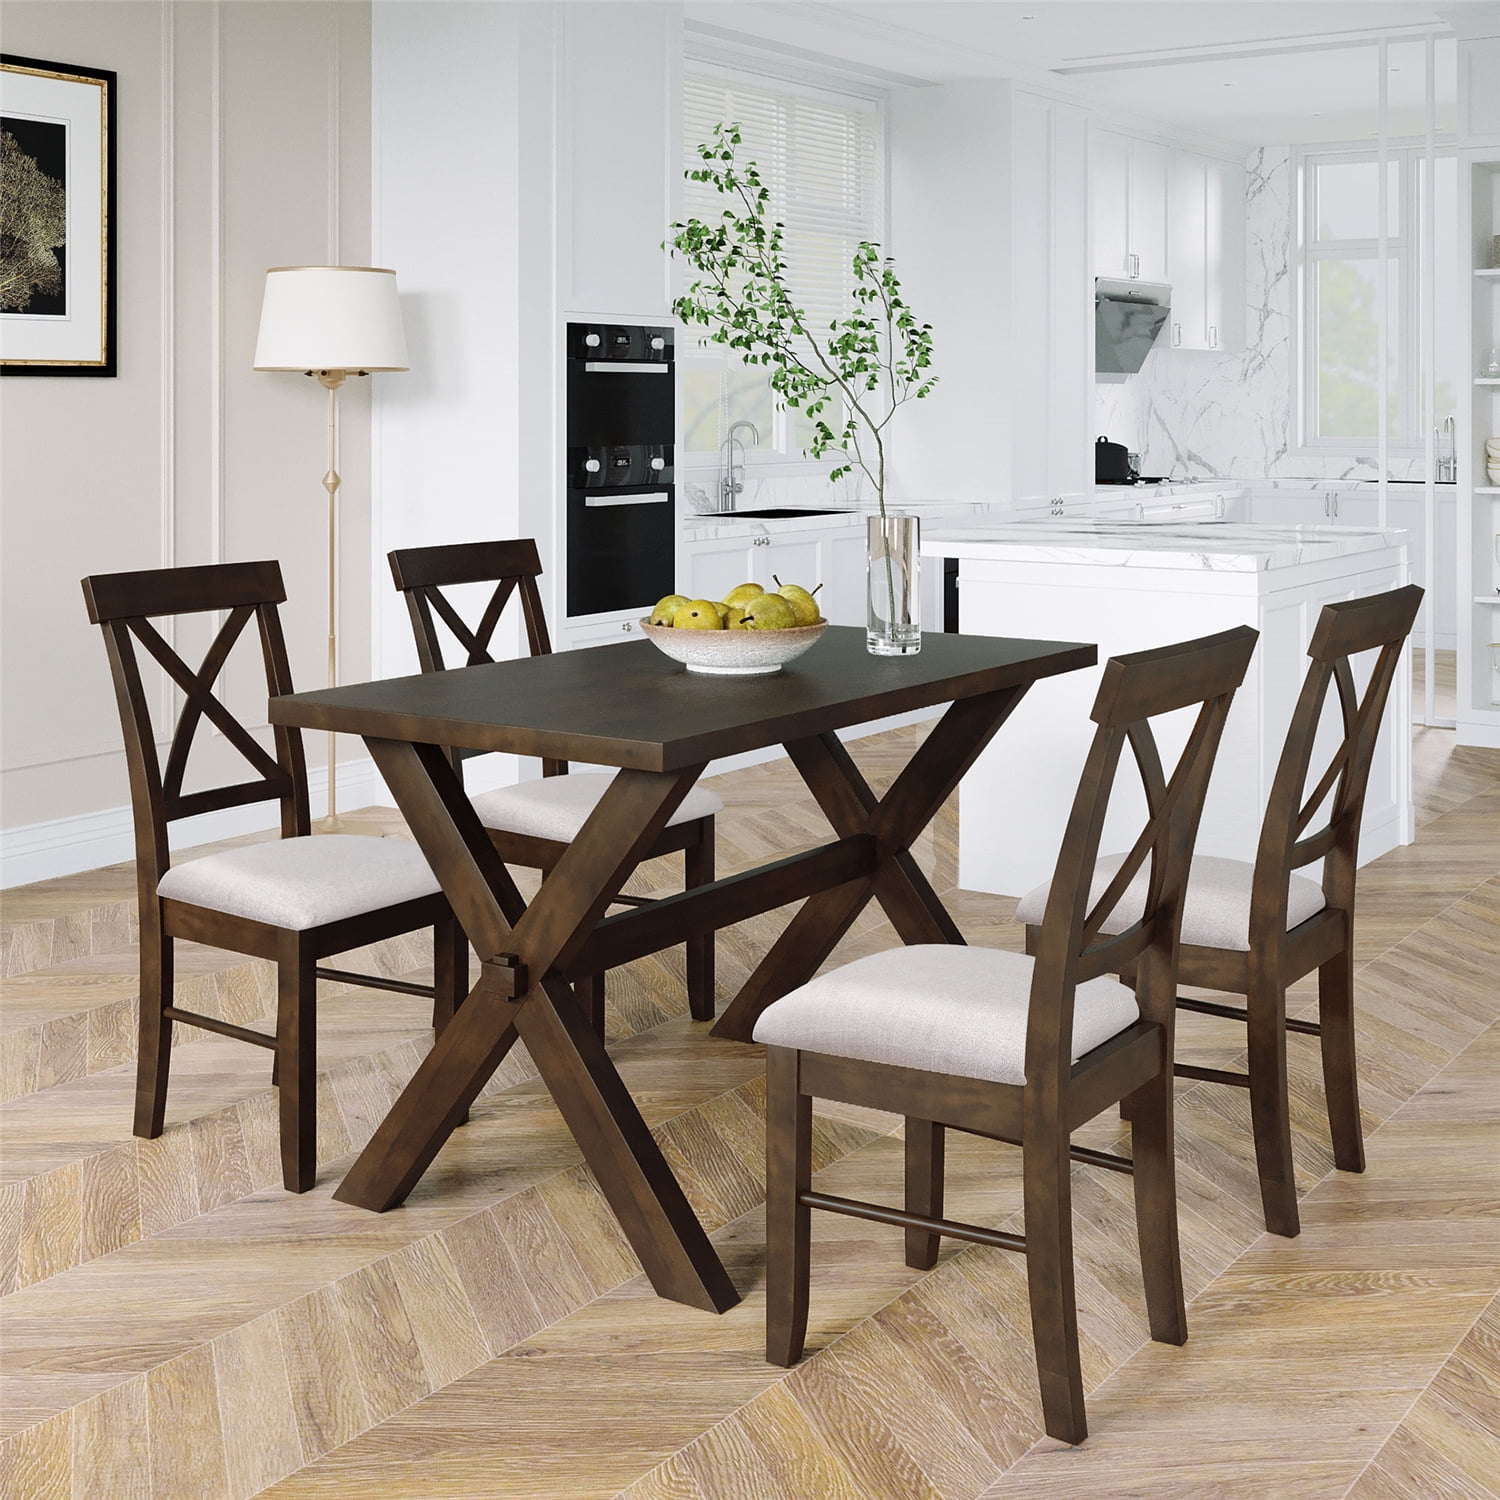 Affordable Rustic Dining Table Sets